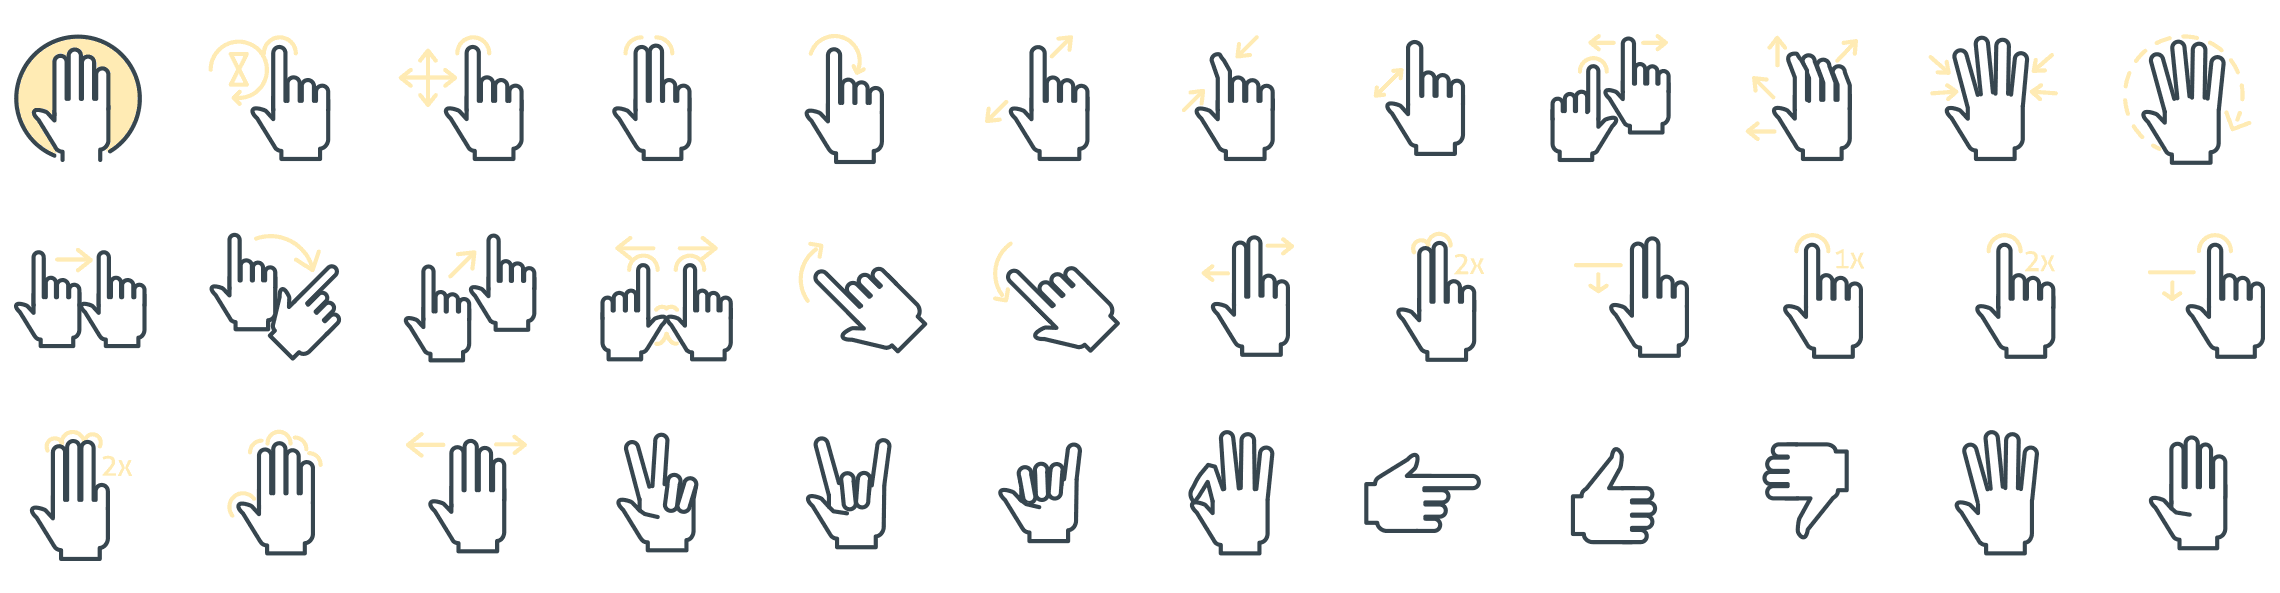 touch-gestures-funline-icons-preview